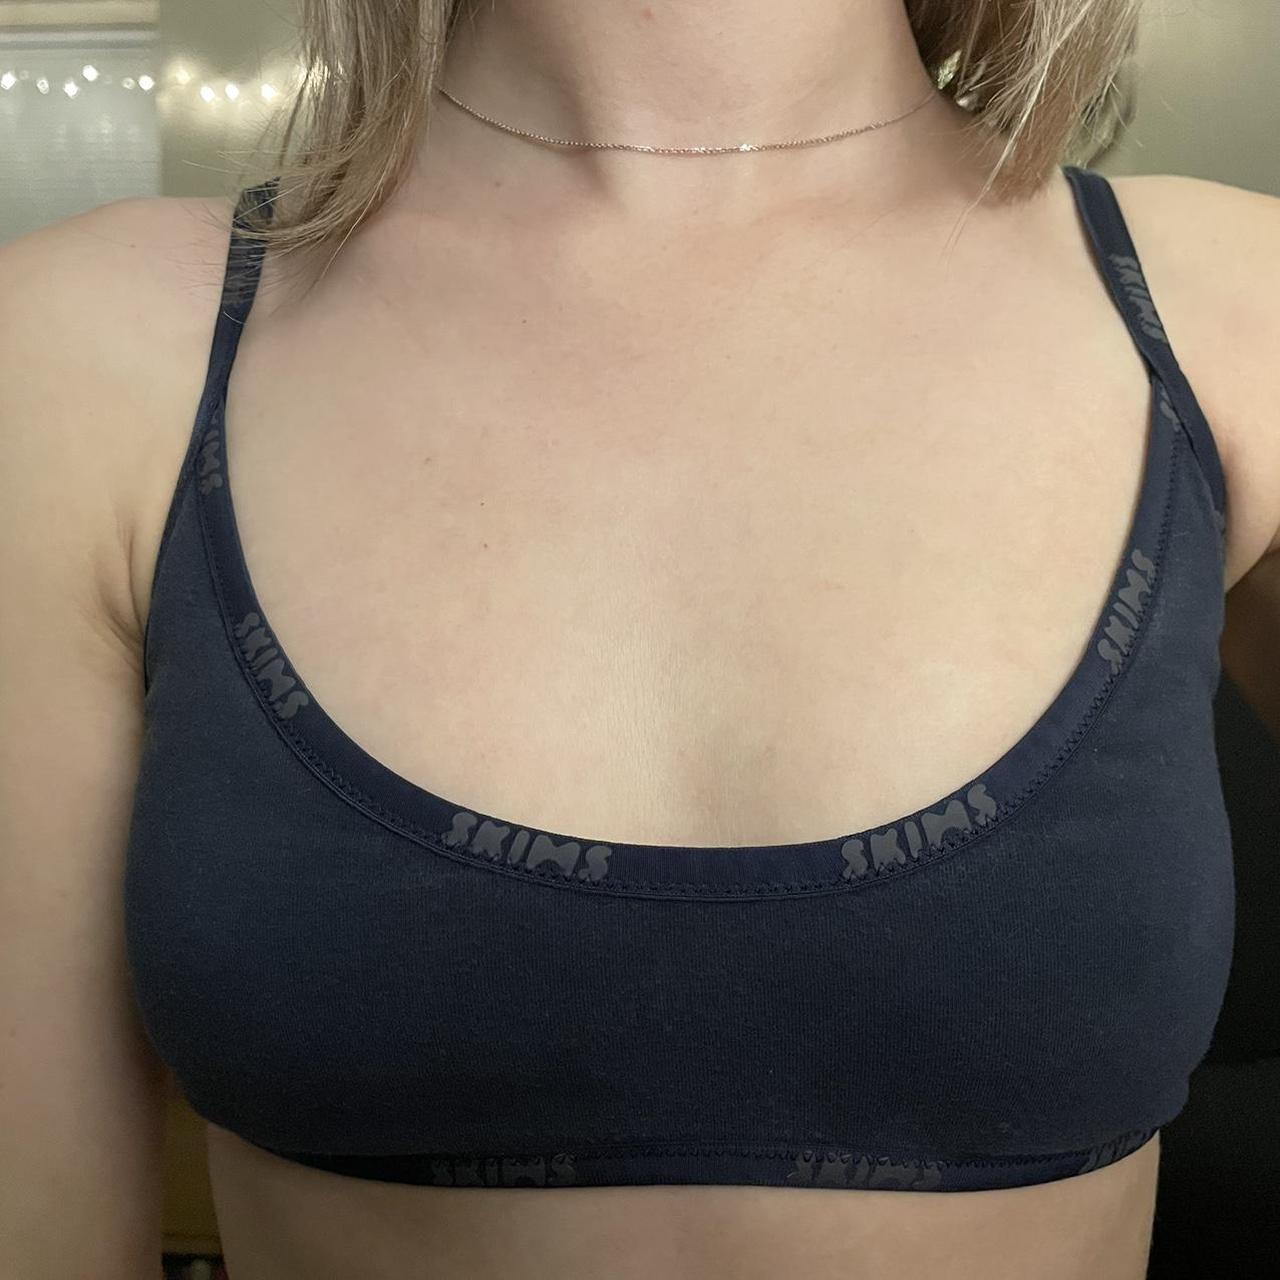 skims scoop bralette size 2x but could also fit an - Depop